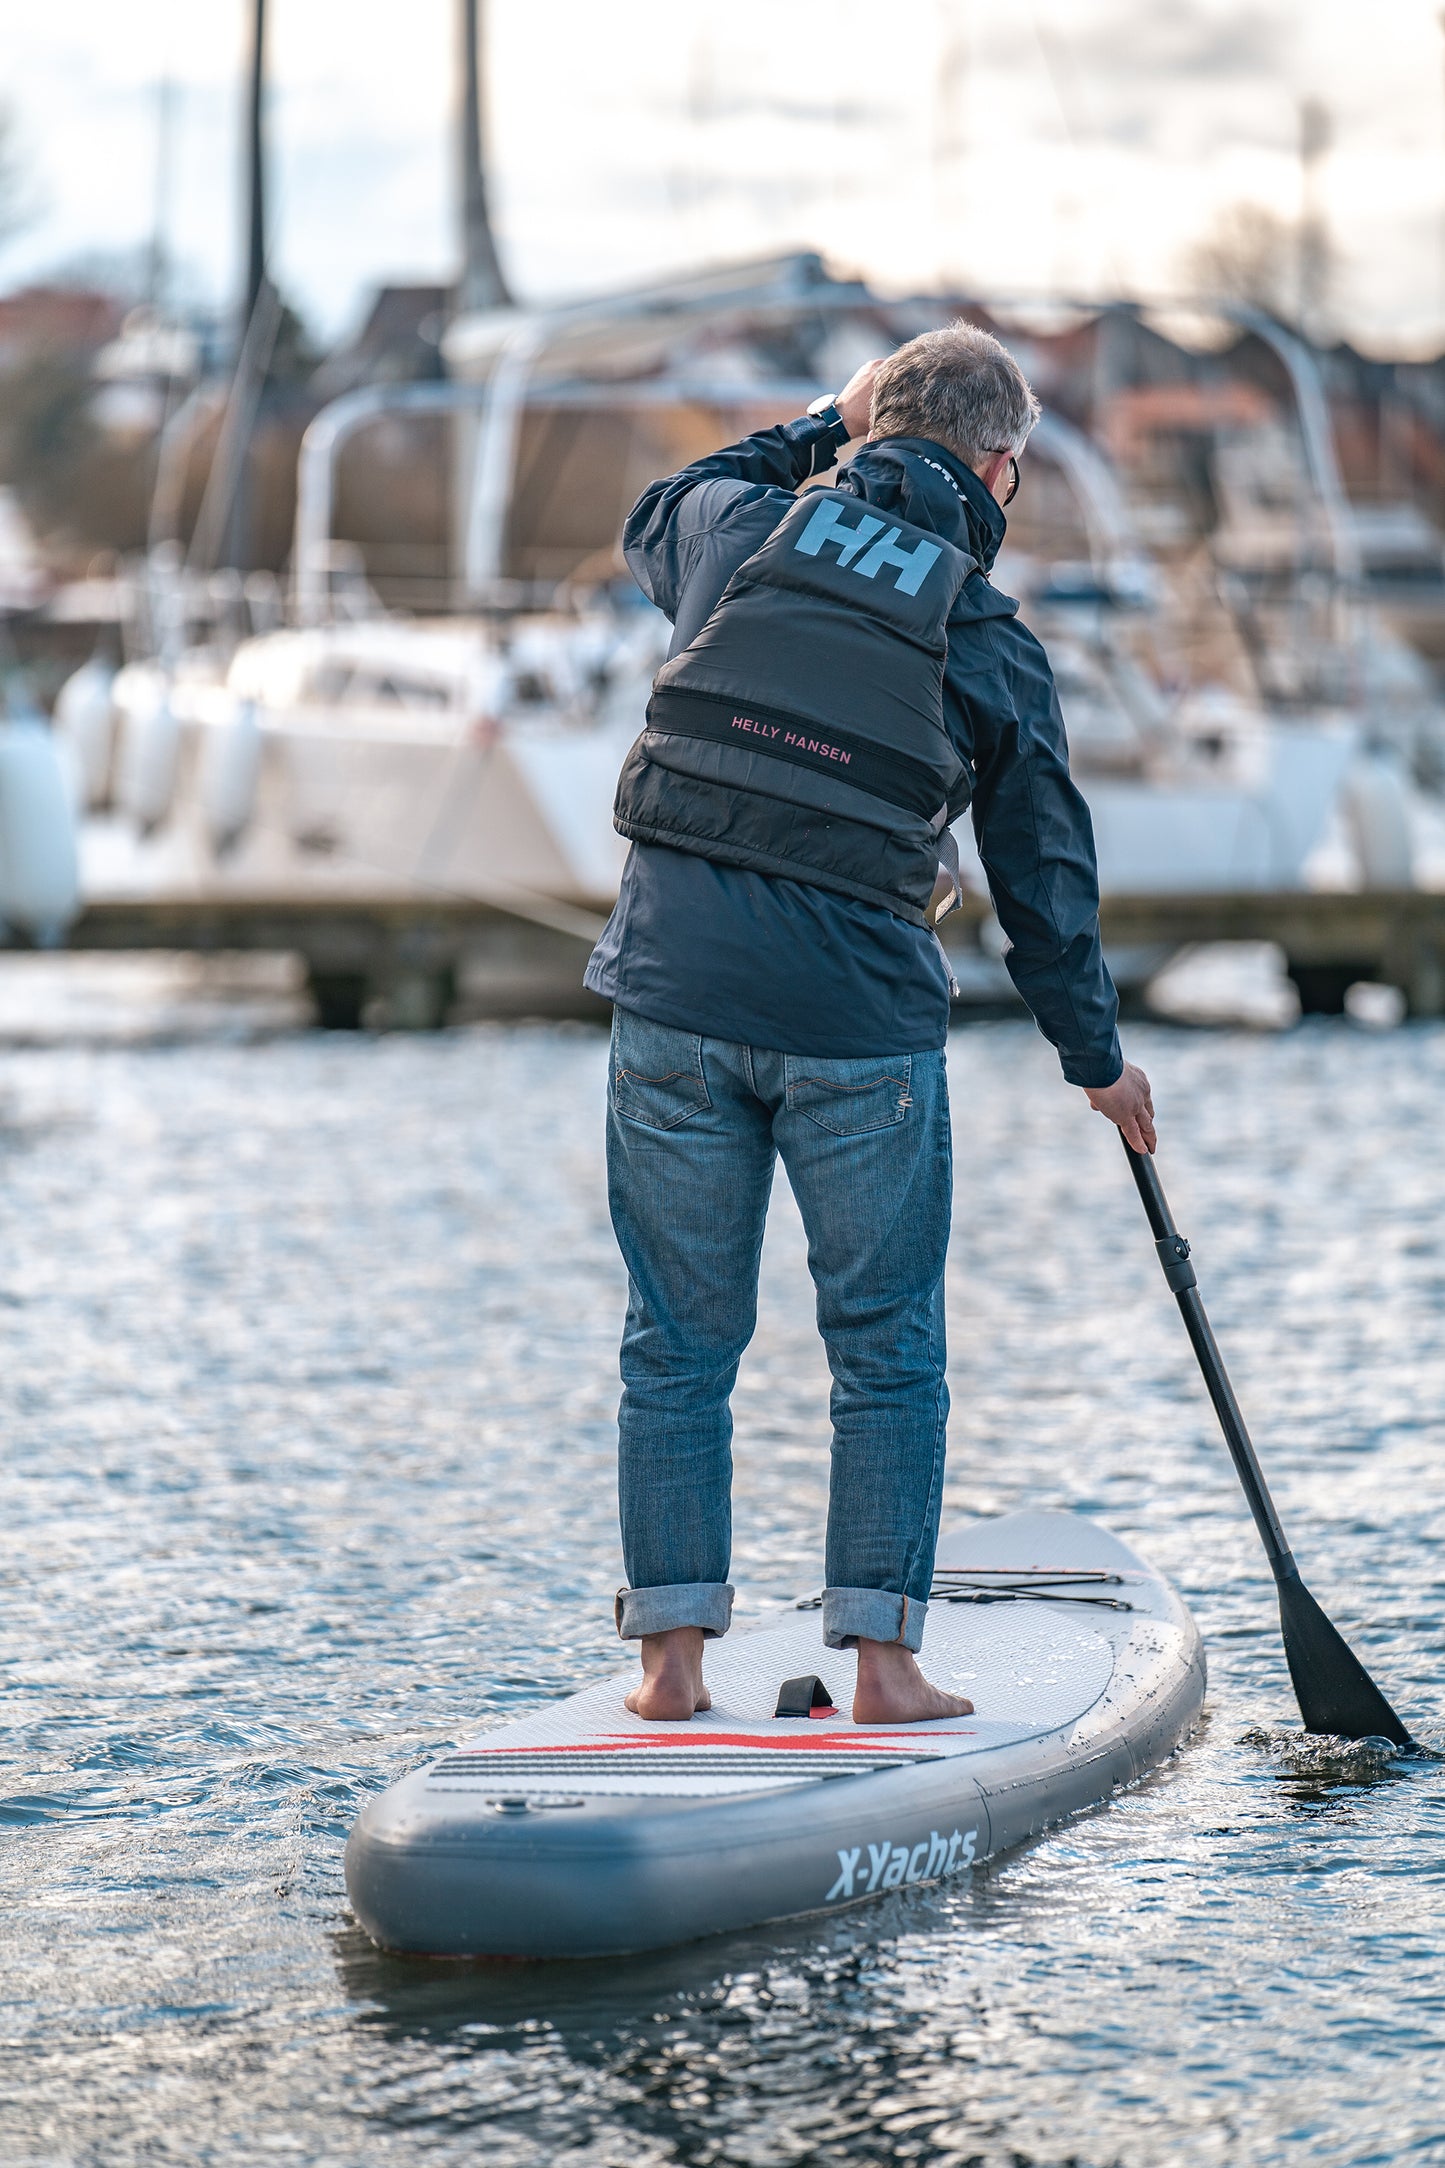 X-Yachts Stand Up Paddle Board, 3,3 m. / 10,8 ft.